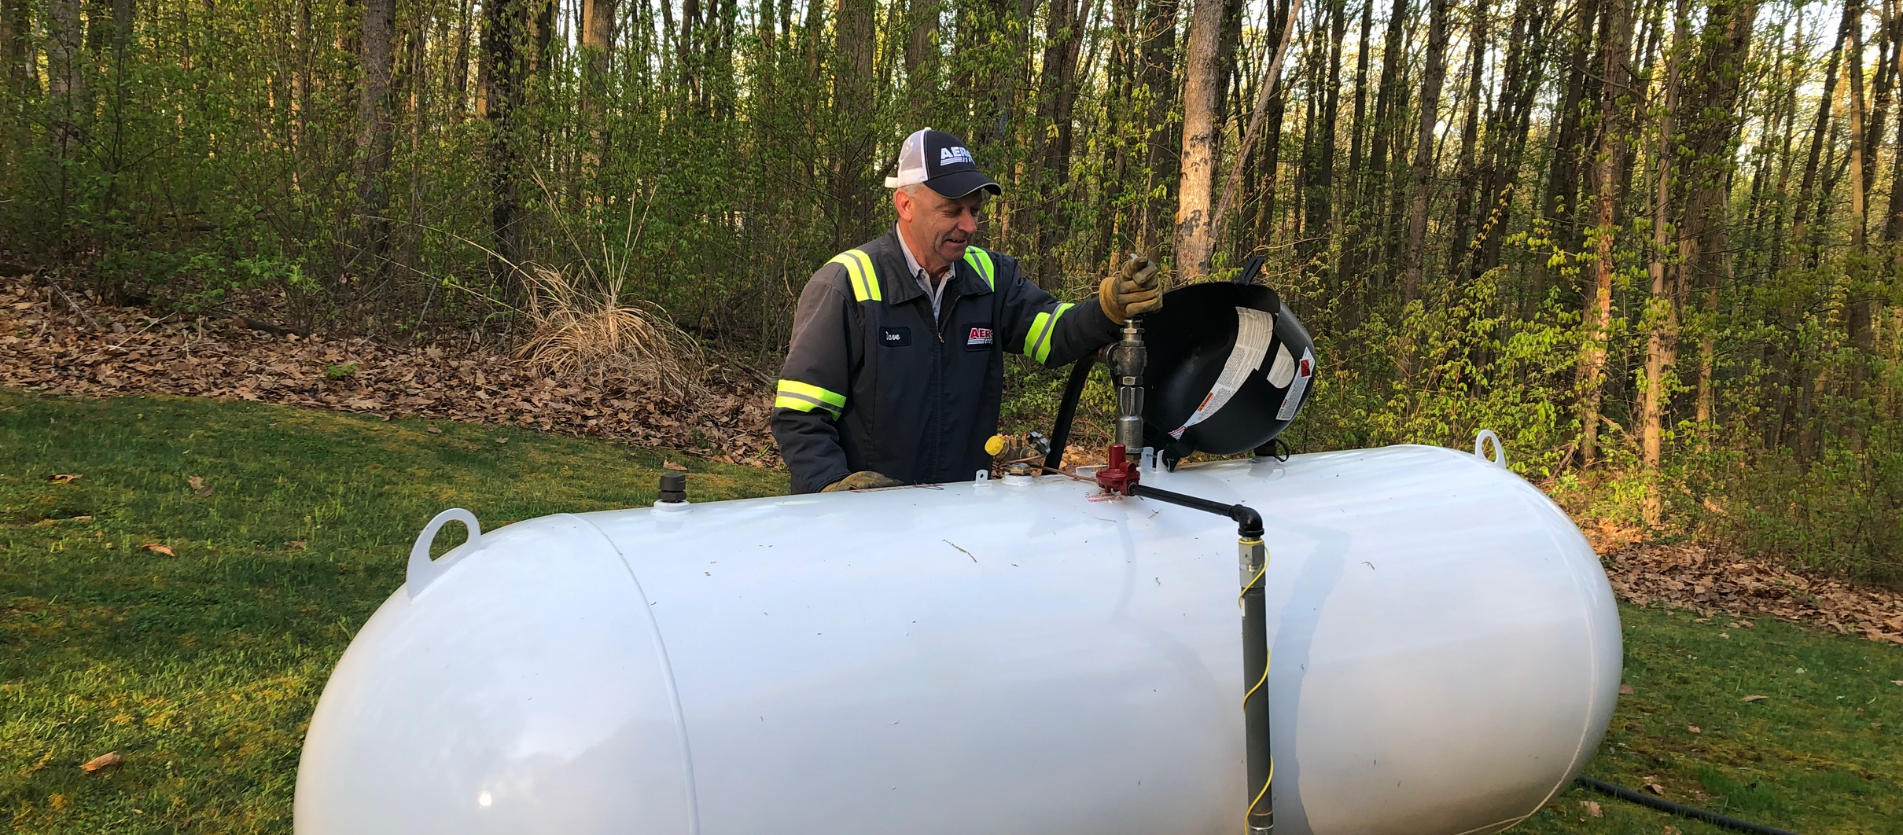 Aero Energy driver performs a fuel delivery.